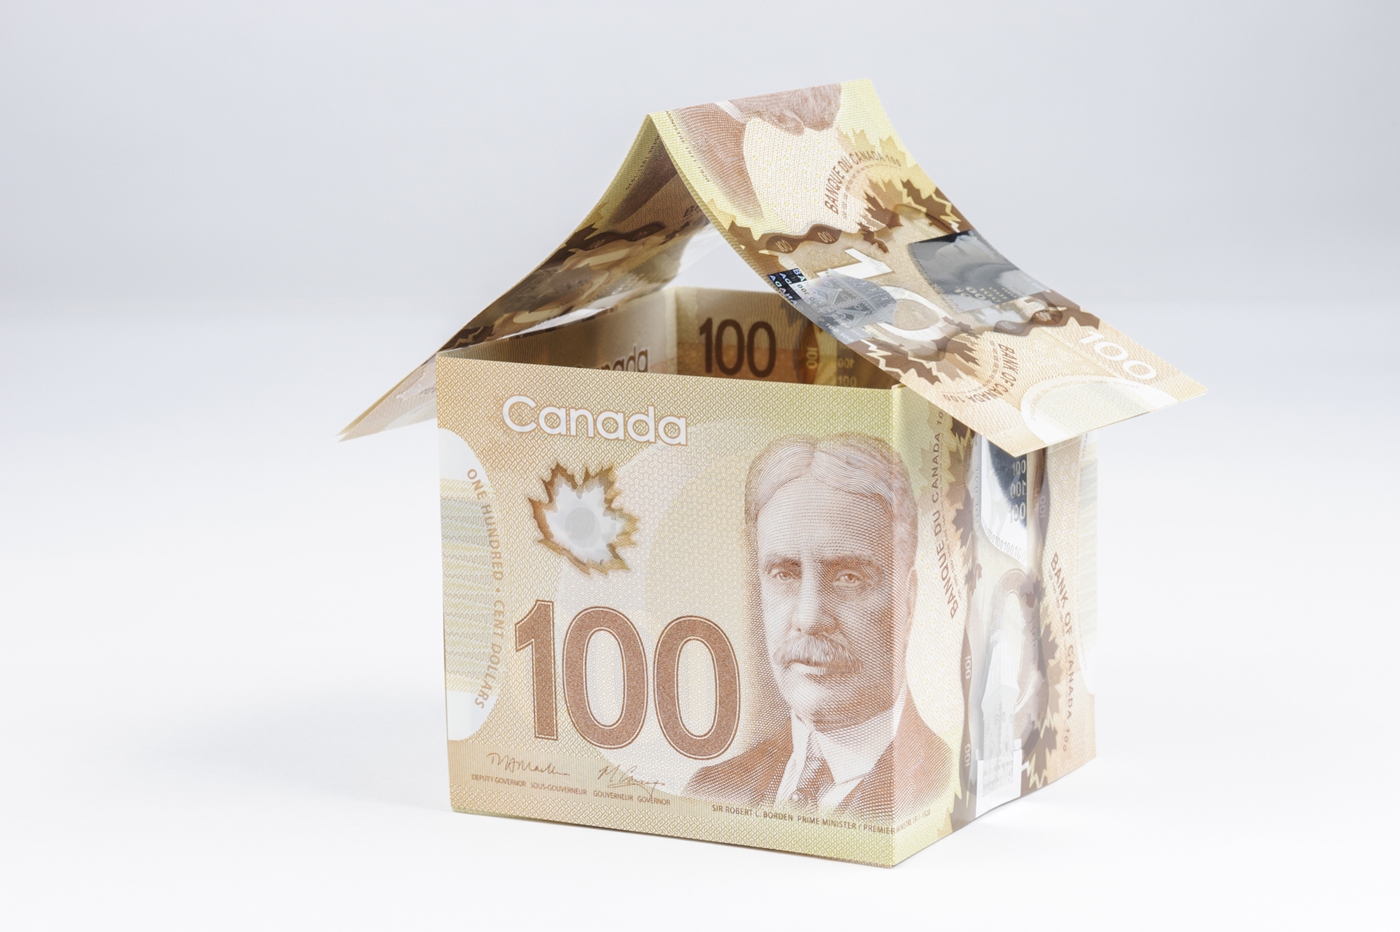 The mortgage stress test has helped protect Canada’s housing market in this downturn: OSFI